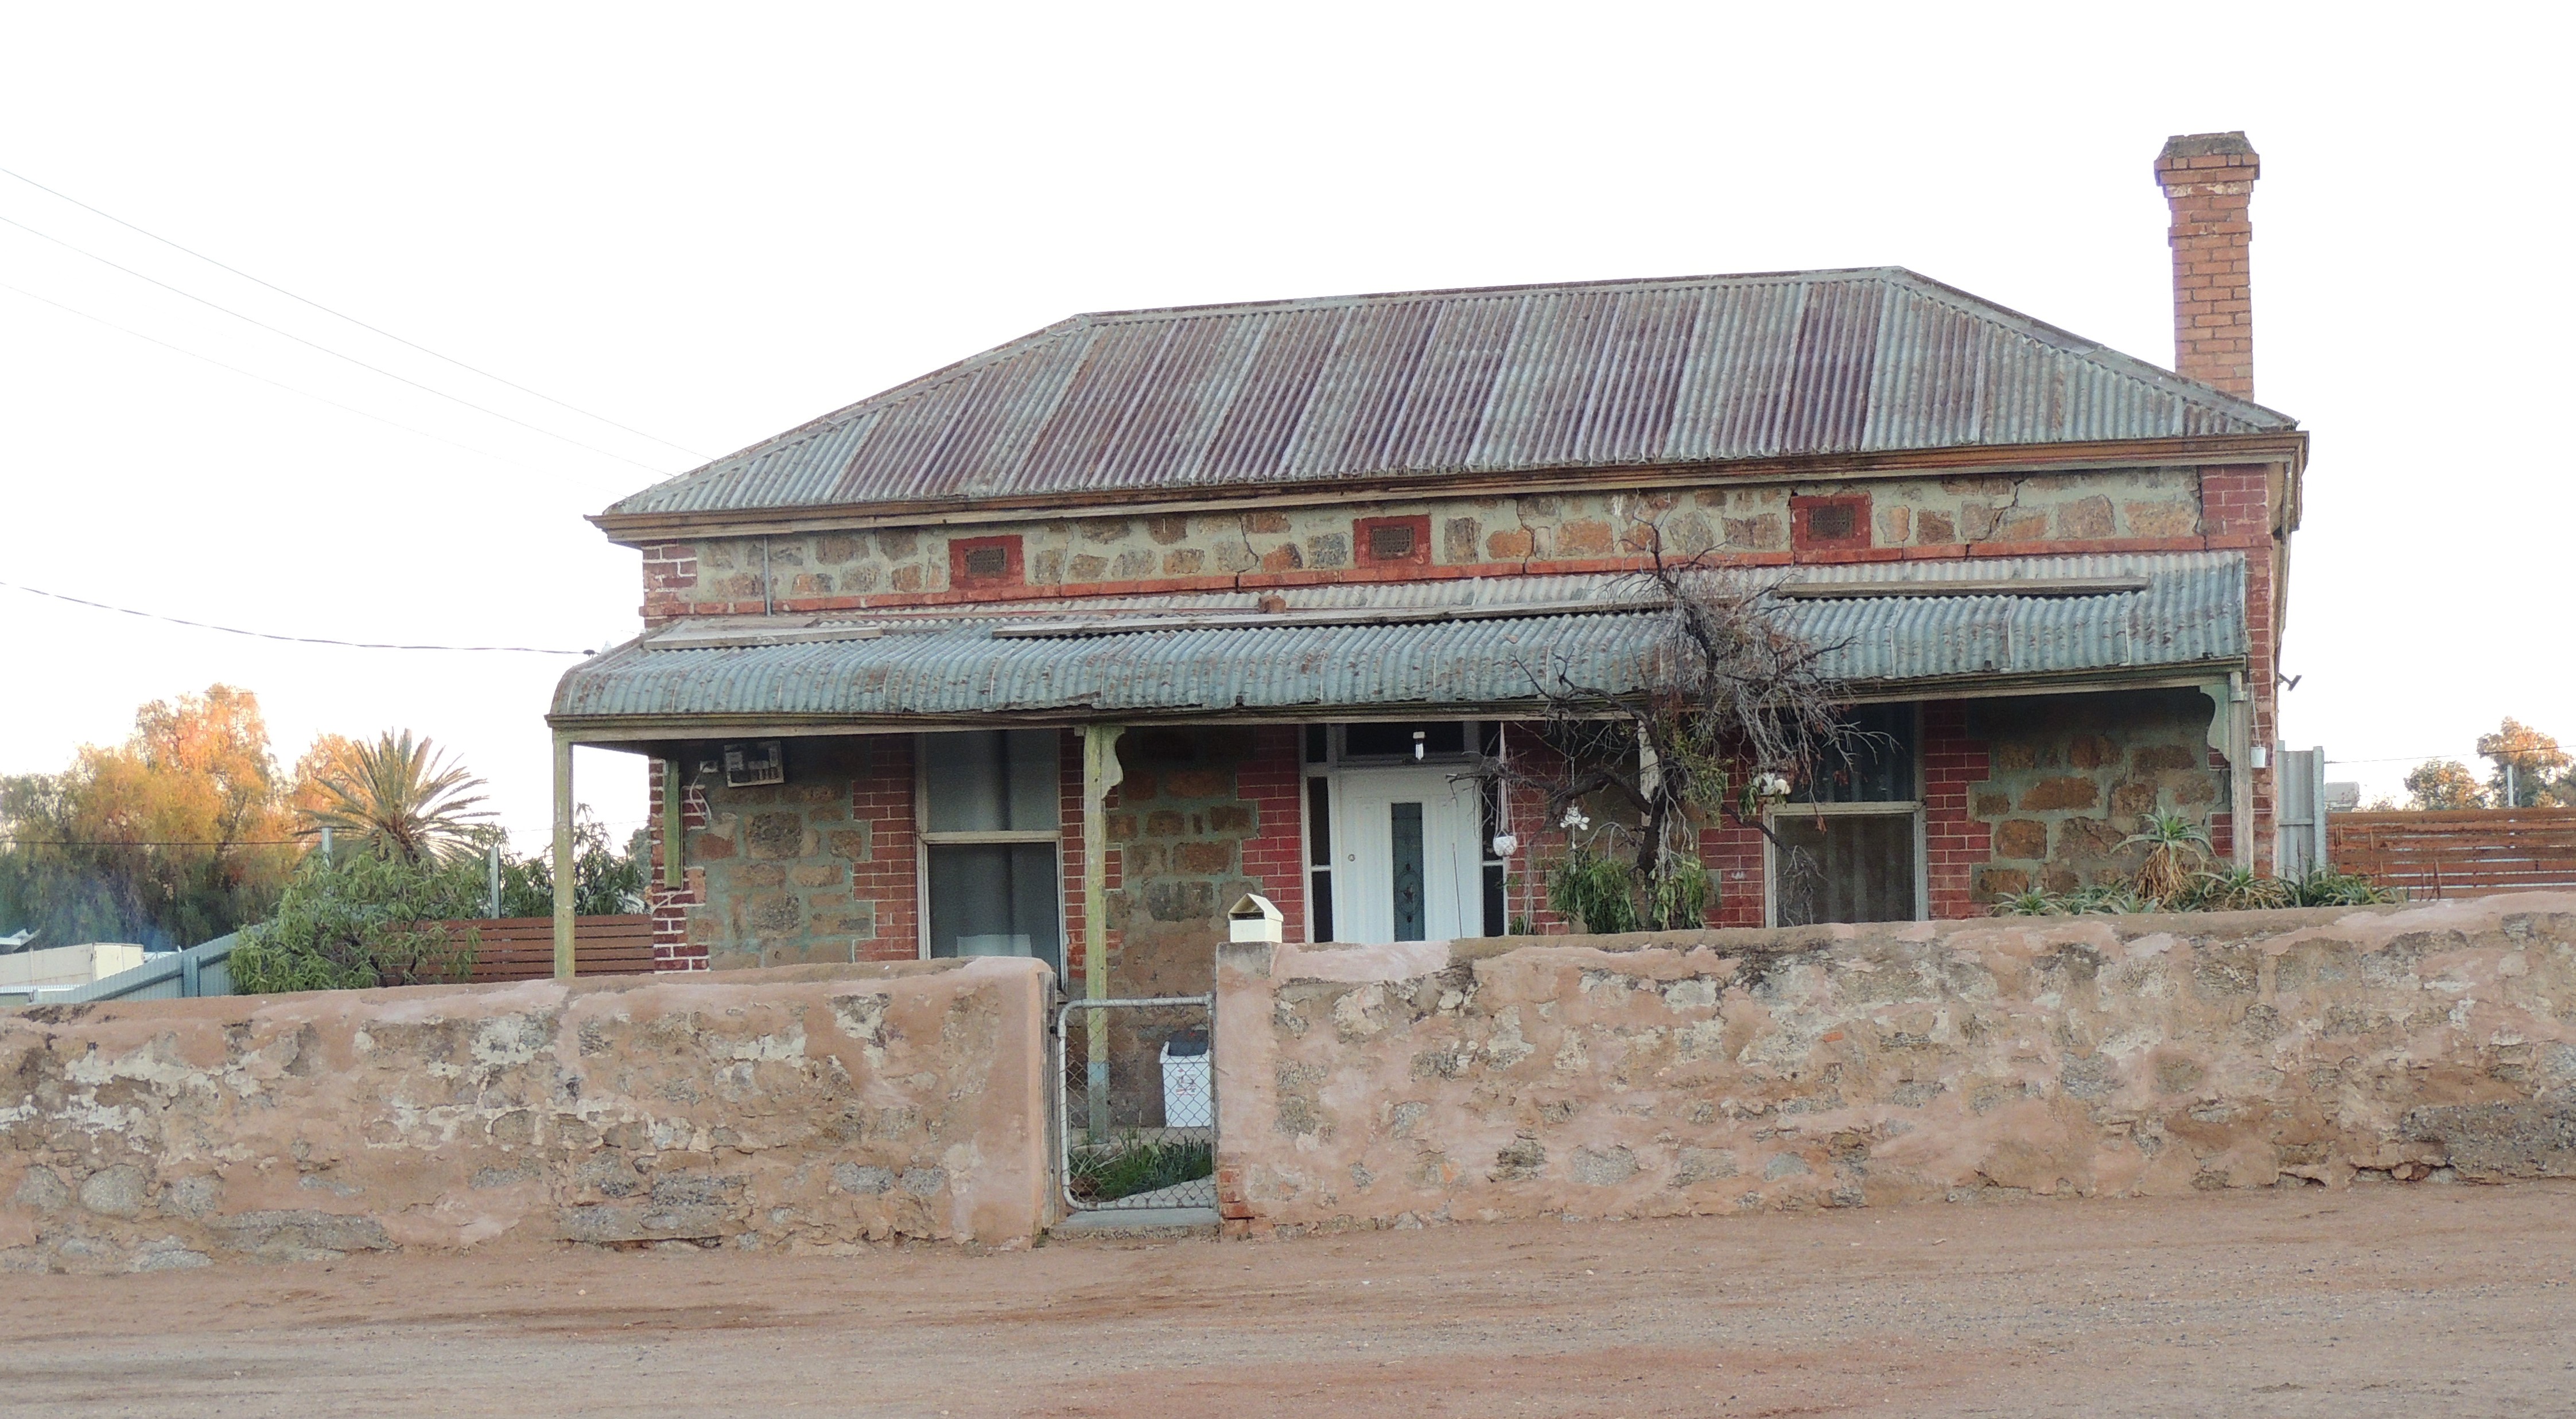 A typical Broken Hill cottage